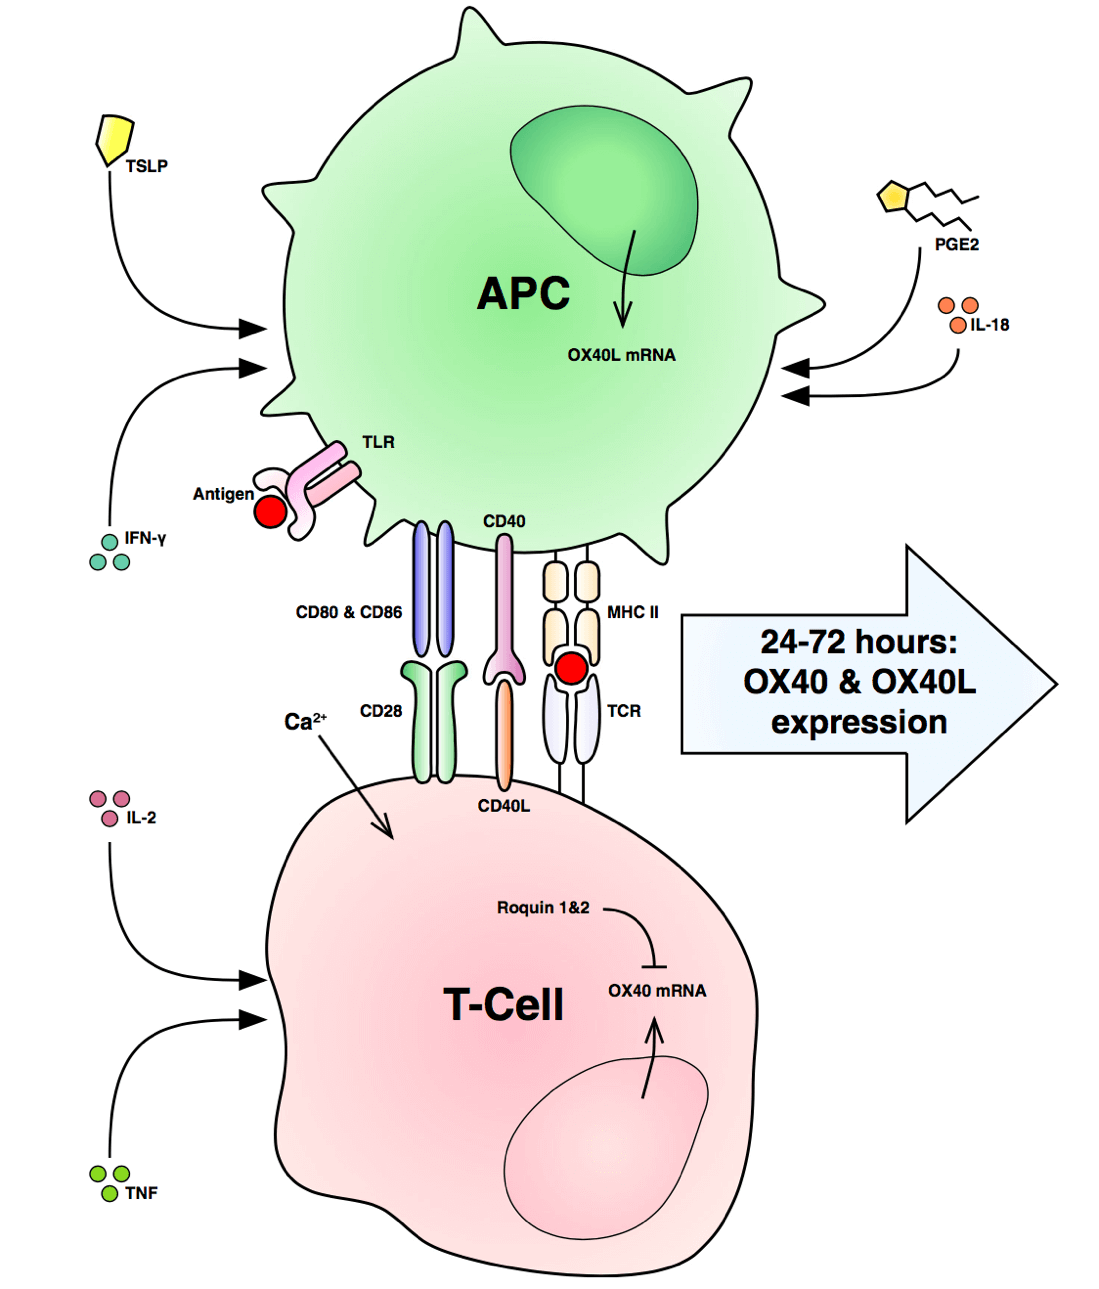 OX40 and OX40L expression, interaction and molecular consequences.